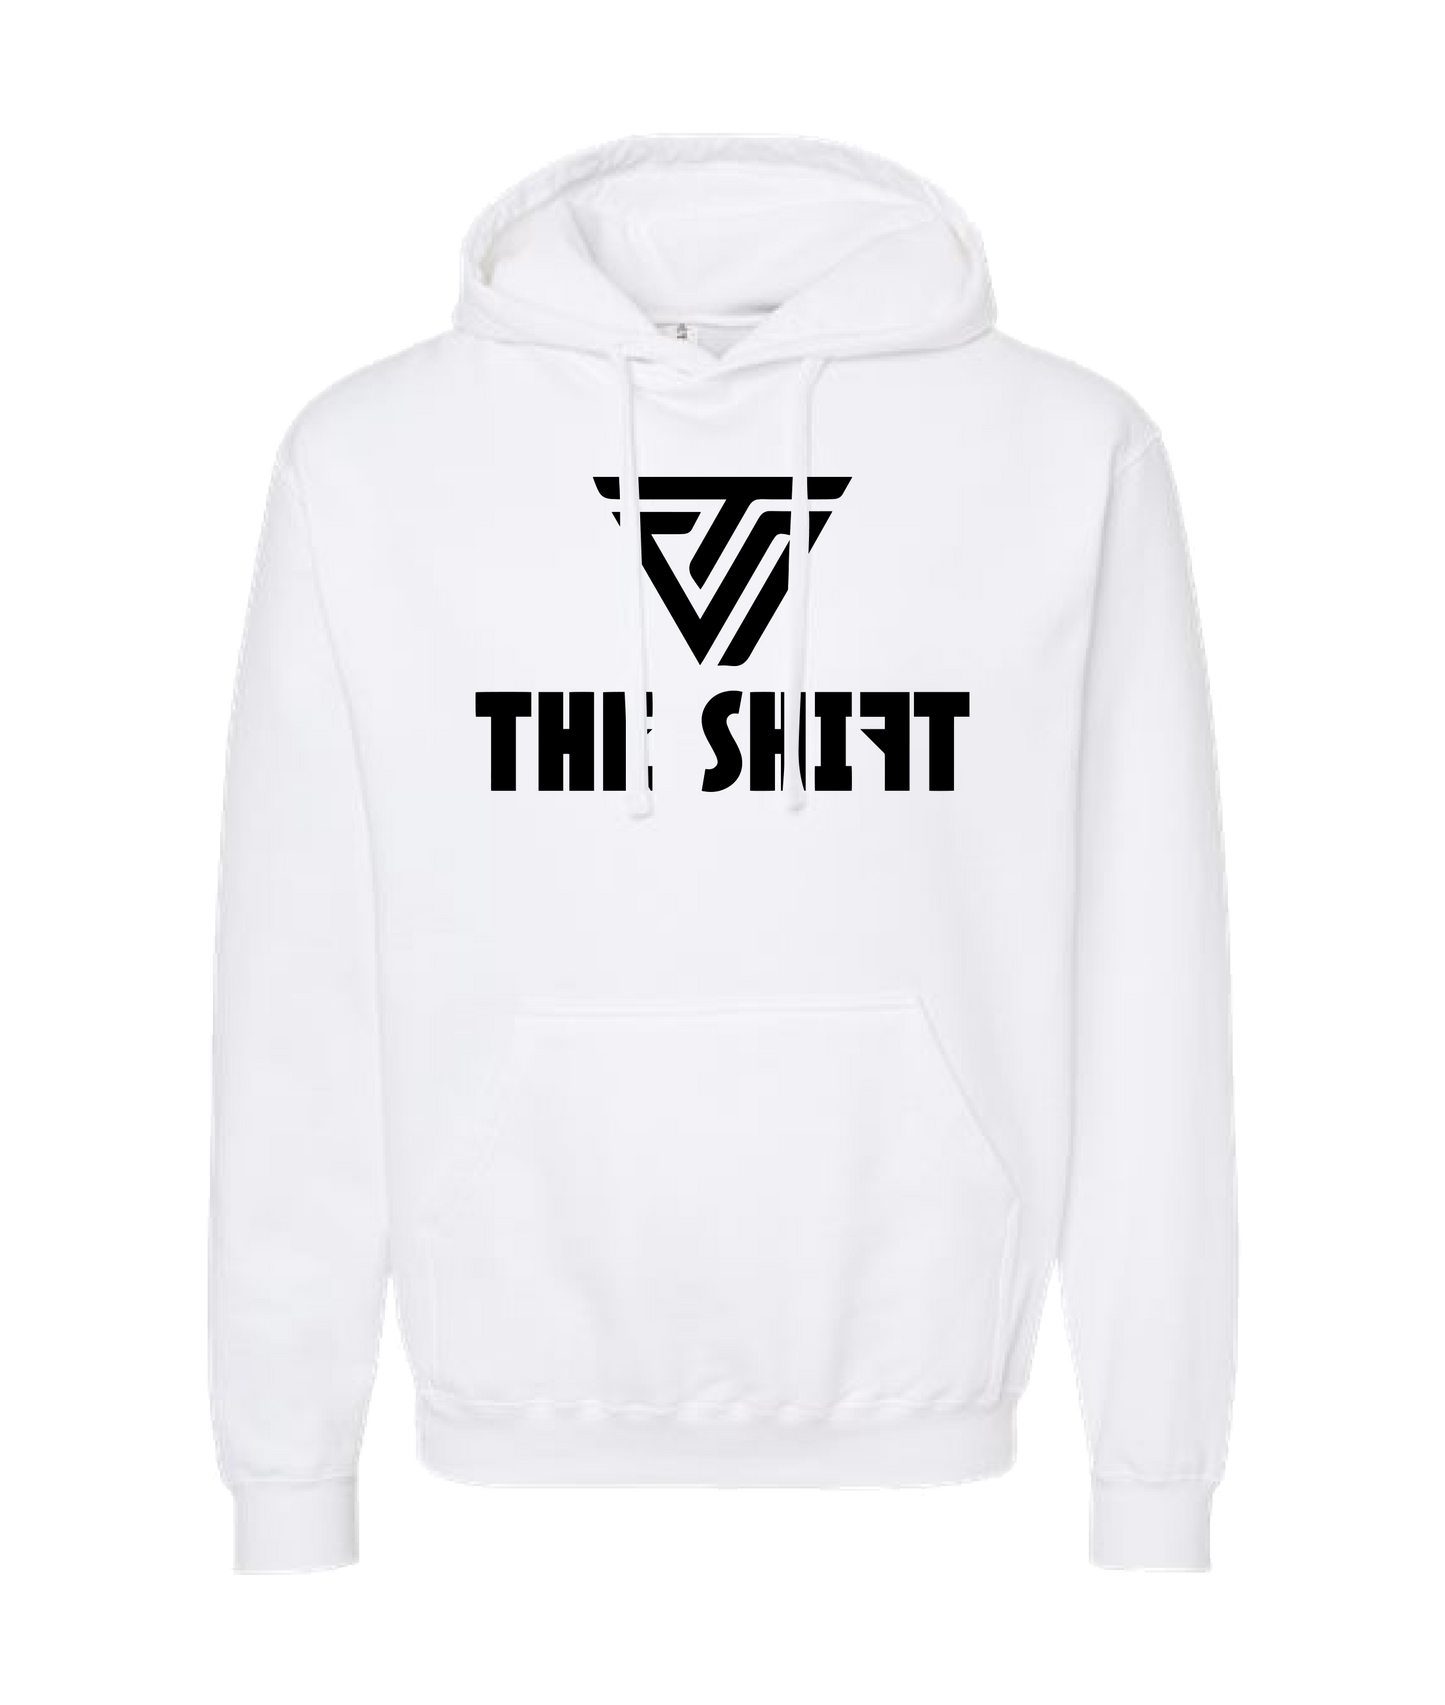 TheShift - Be The Shift - White Hoodie